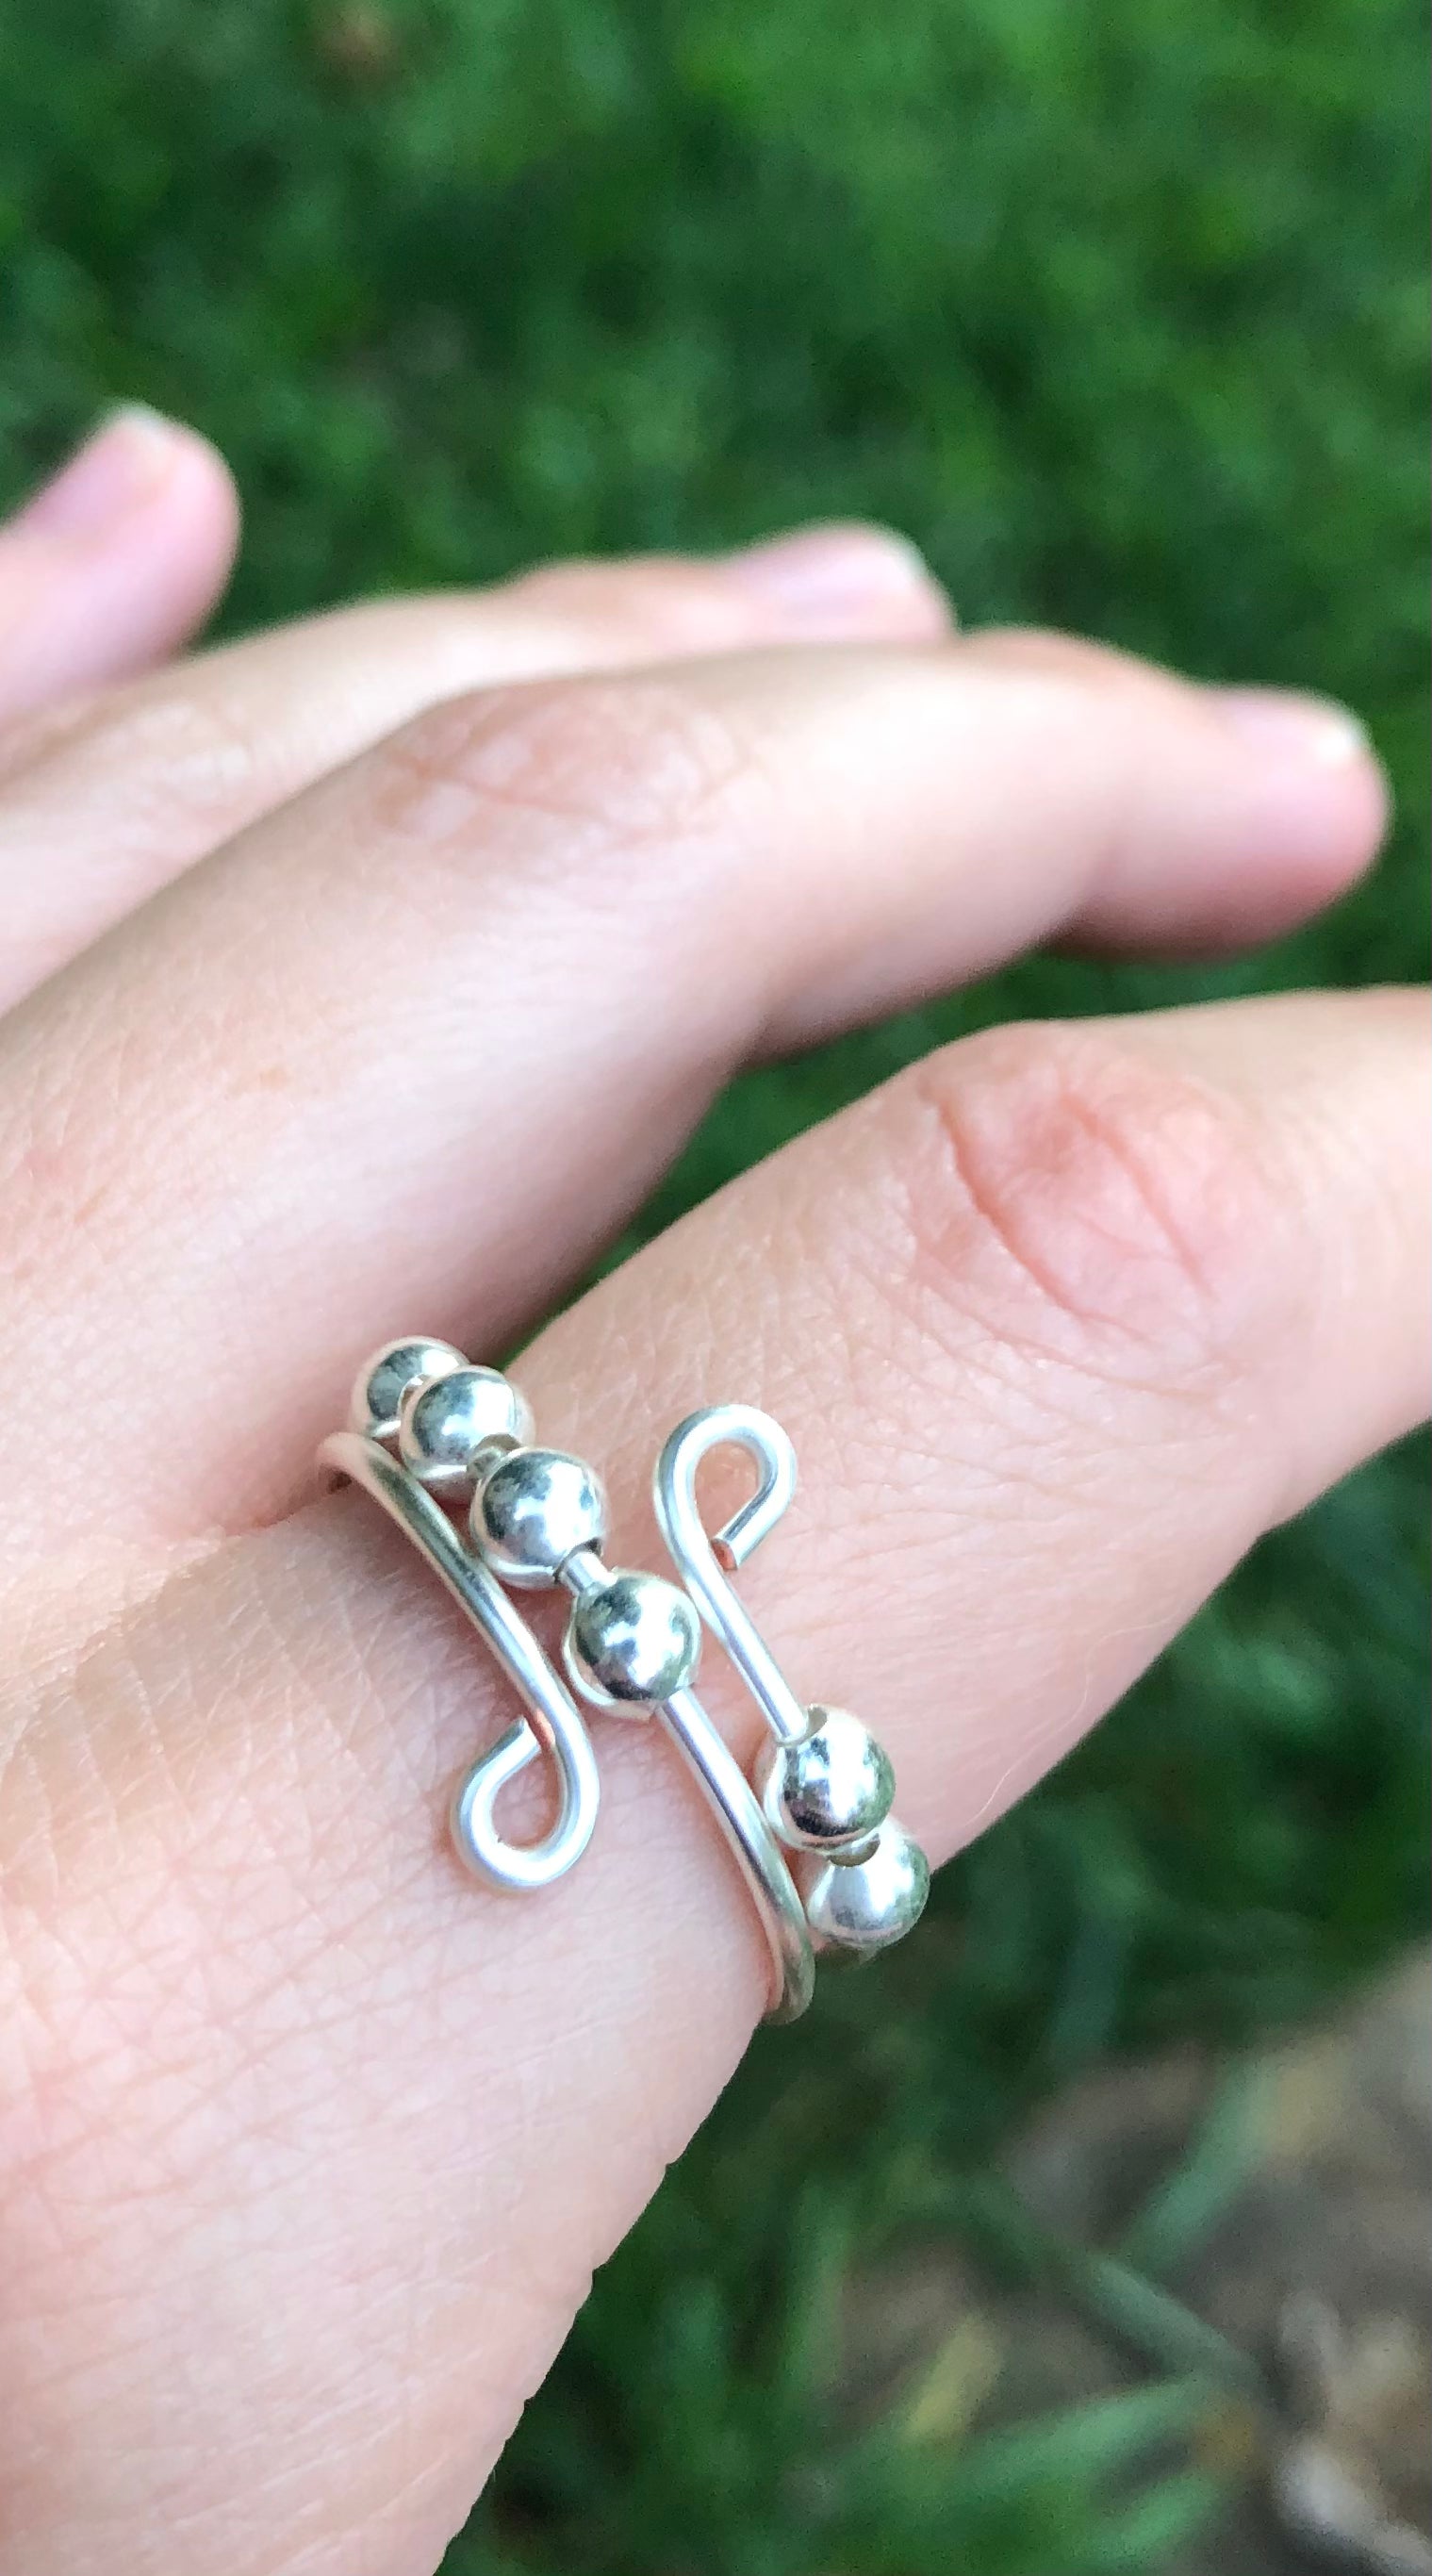 Anxiety rings for women, Fidget rings for women, Anxiety relief ring